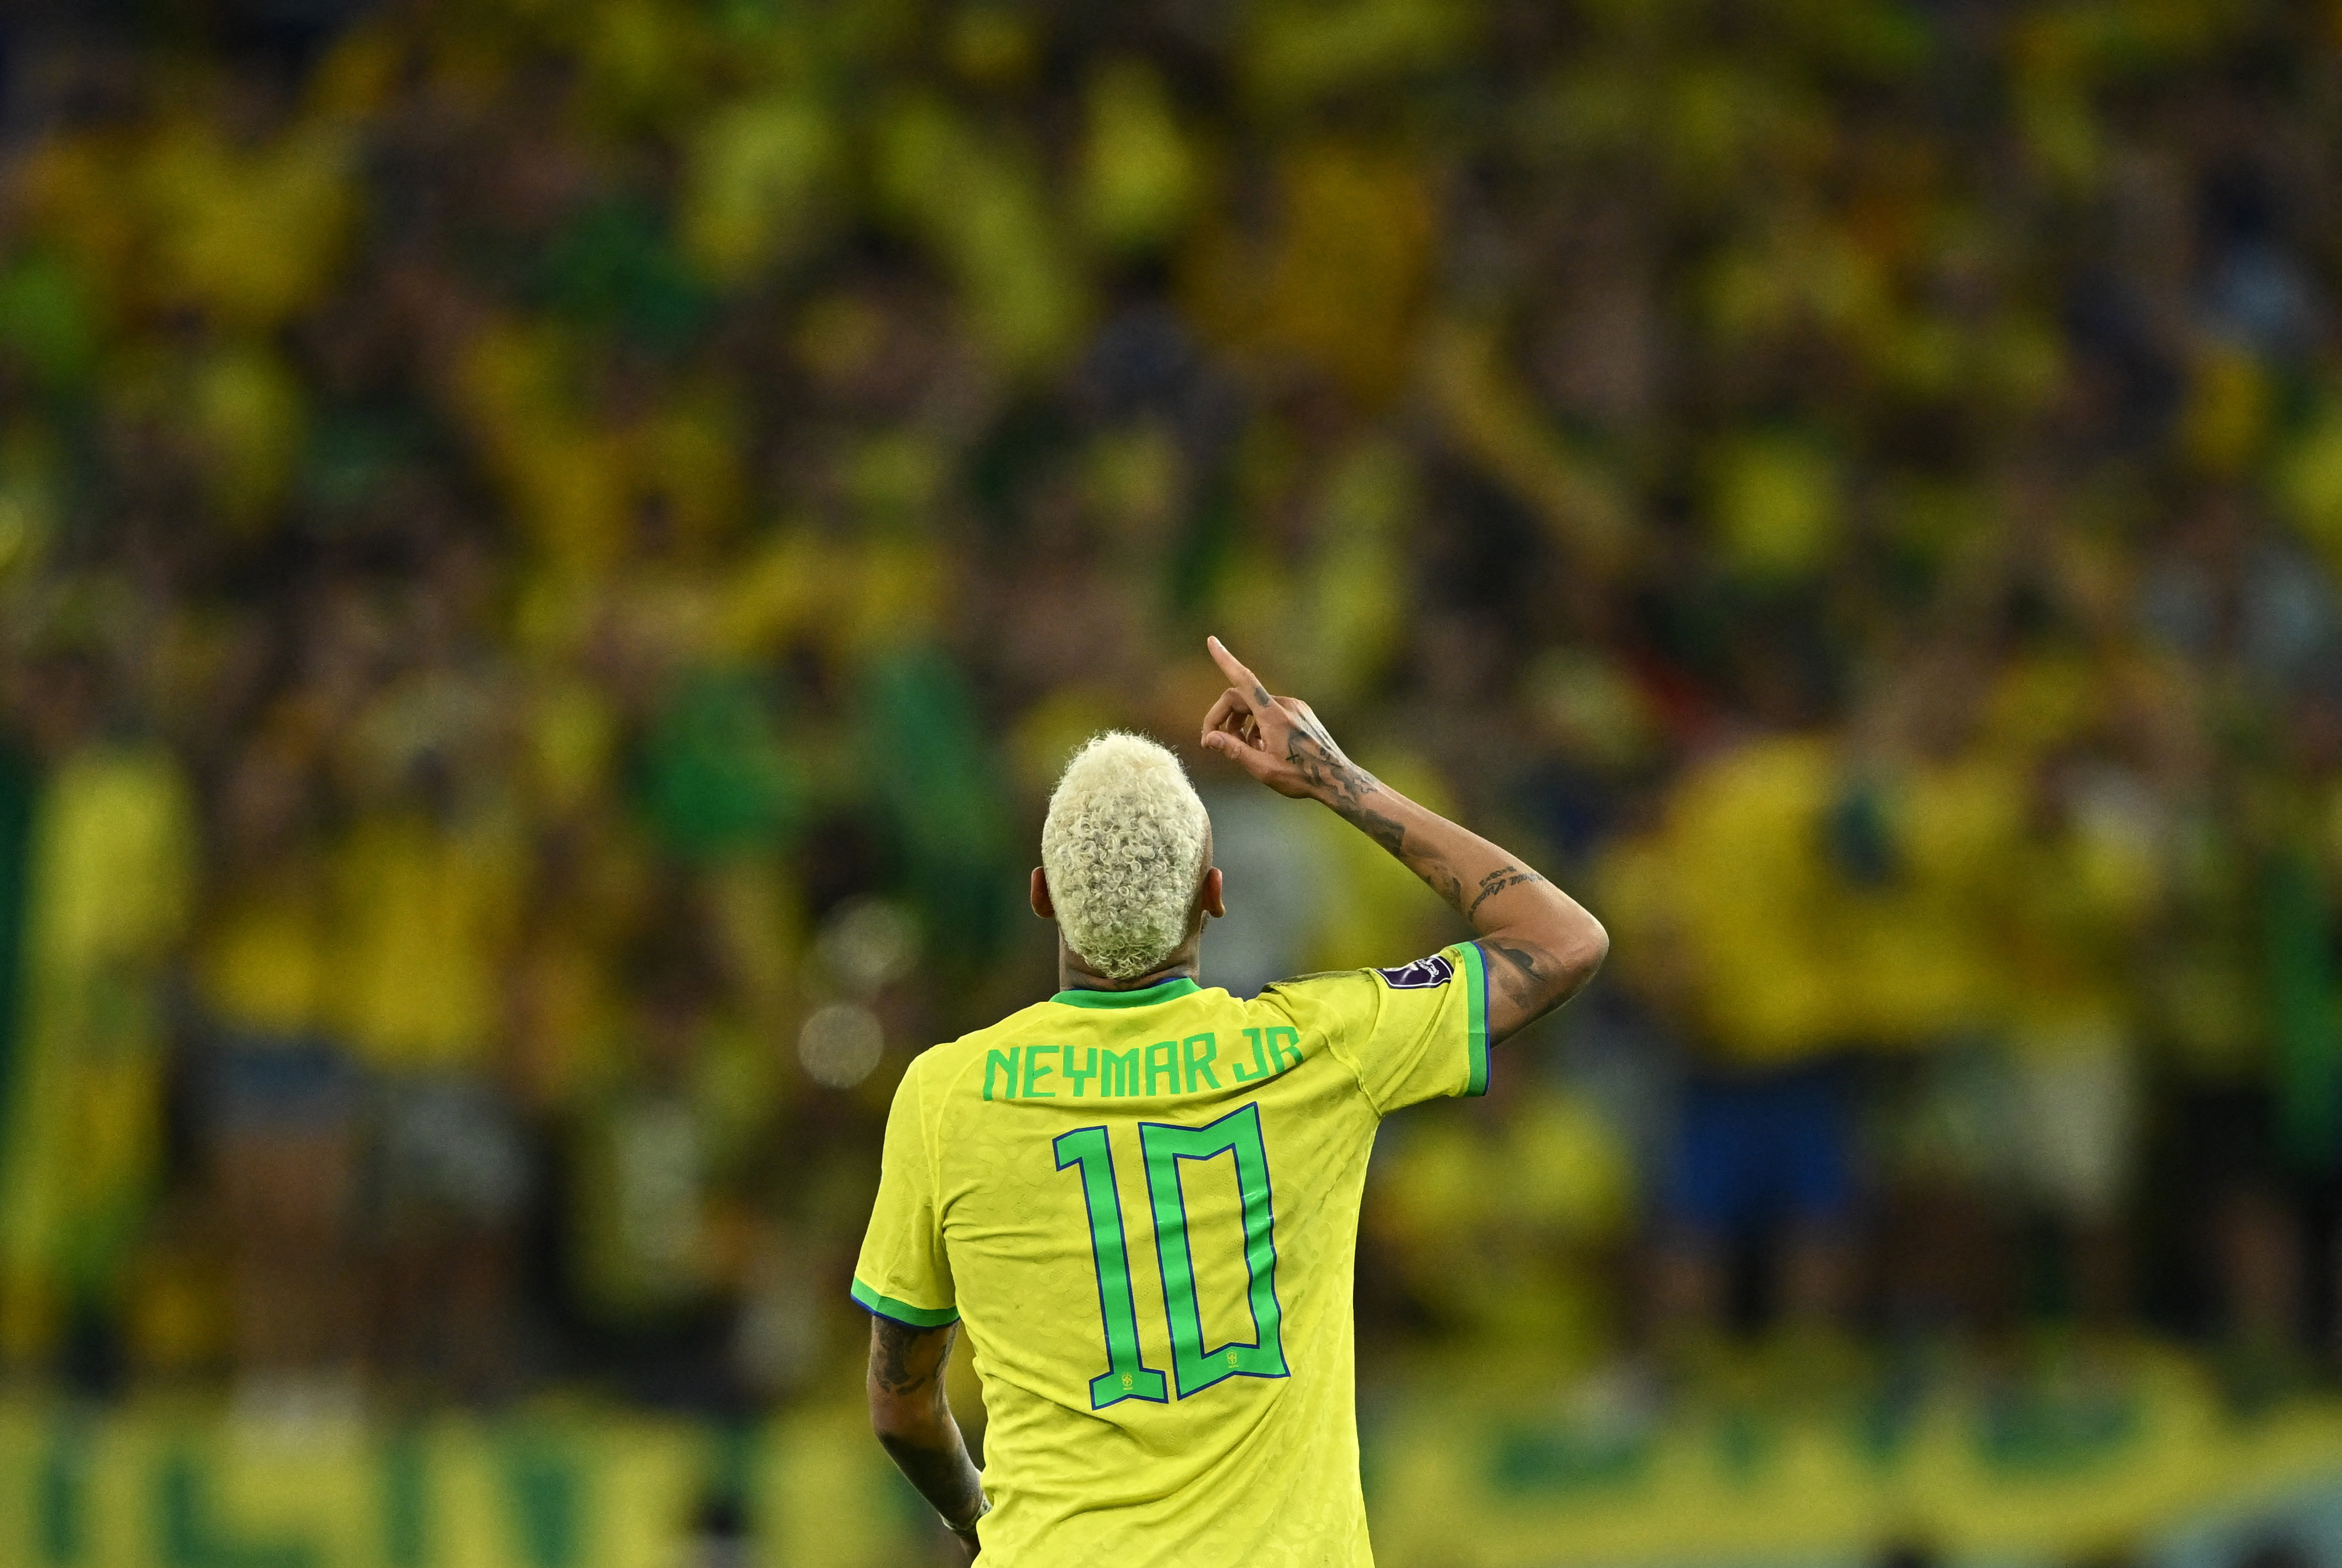 Brazil and Neymar Advance to World Cup Quarterfinals - The New York Times